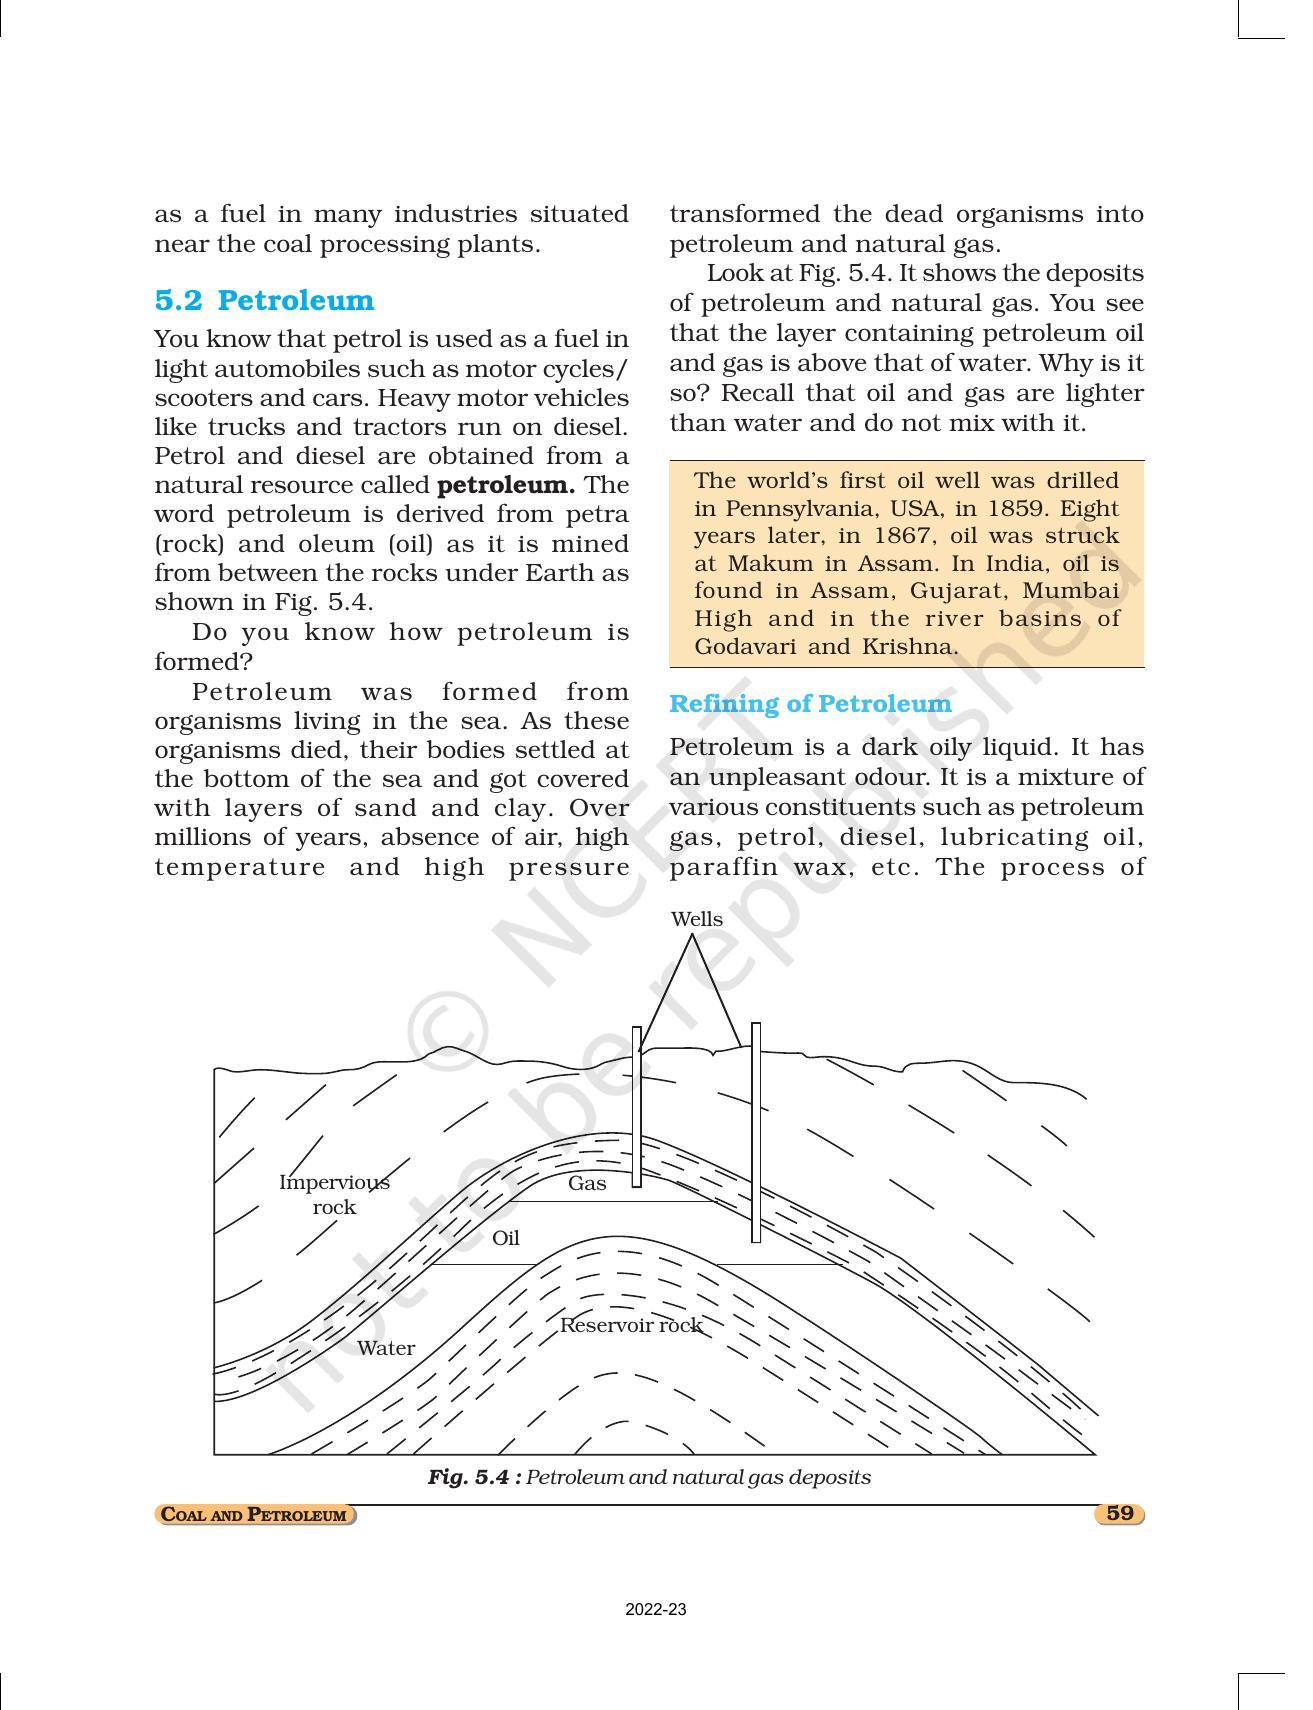 NCERT Book for Class 8 Science Chapter 5 Coal and Petroleum - Page 4